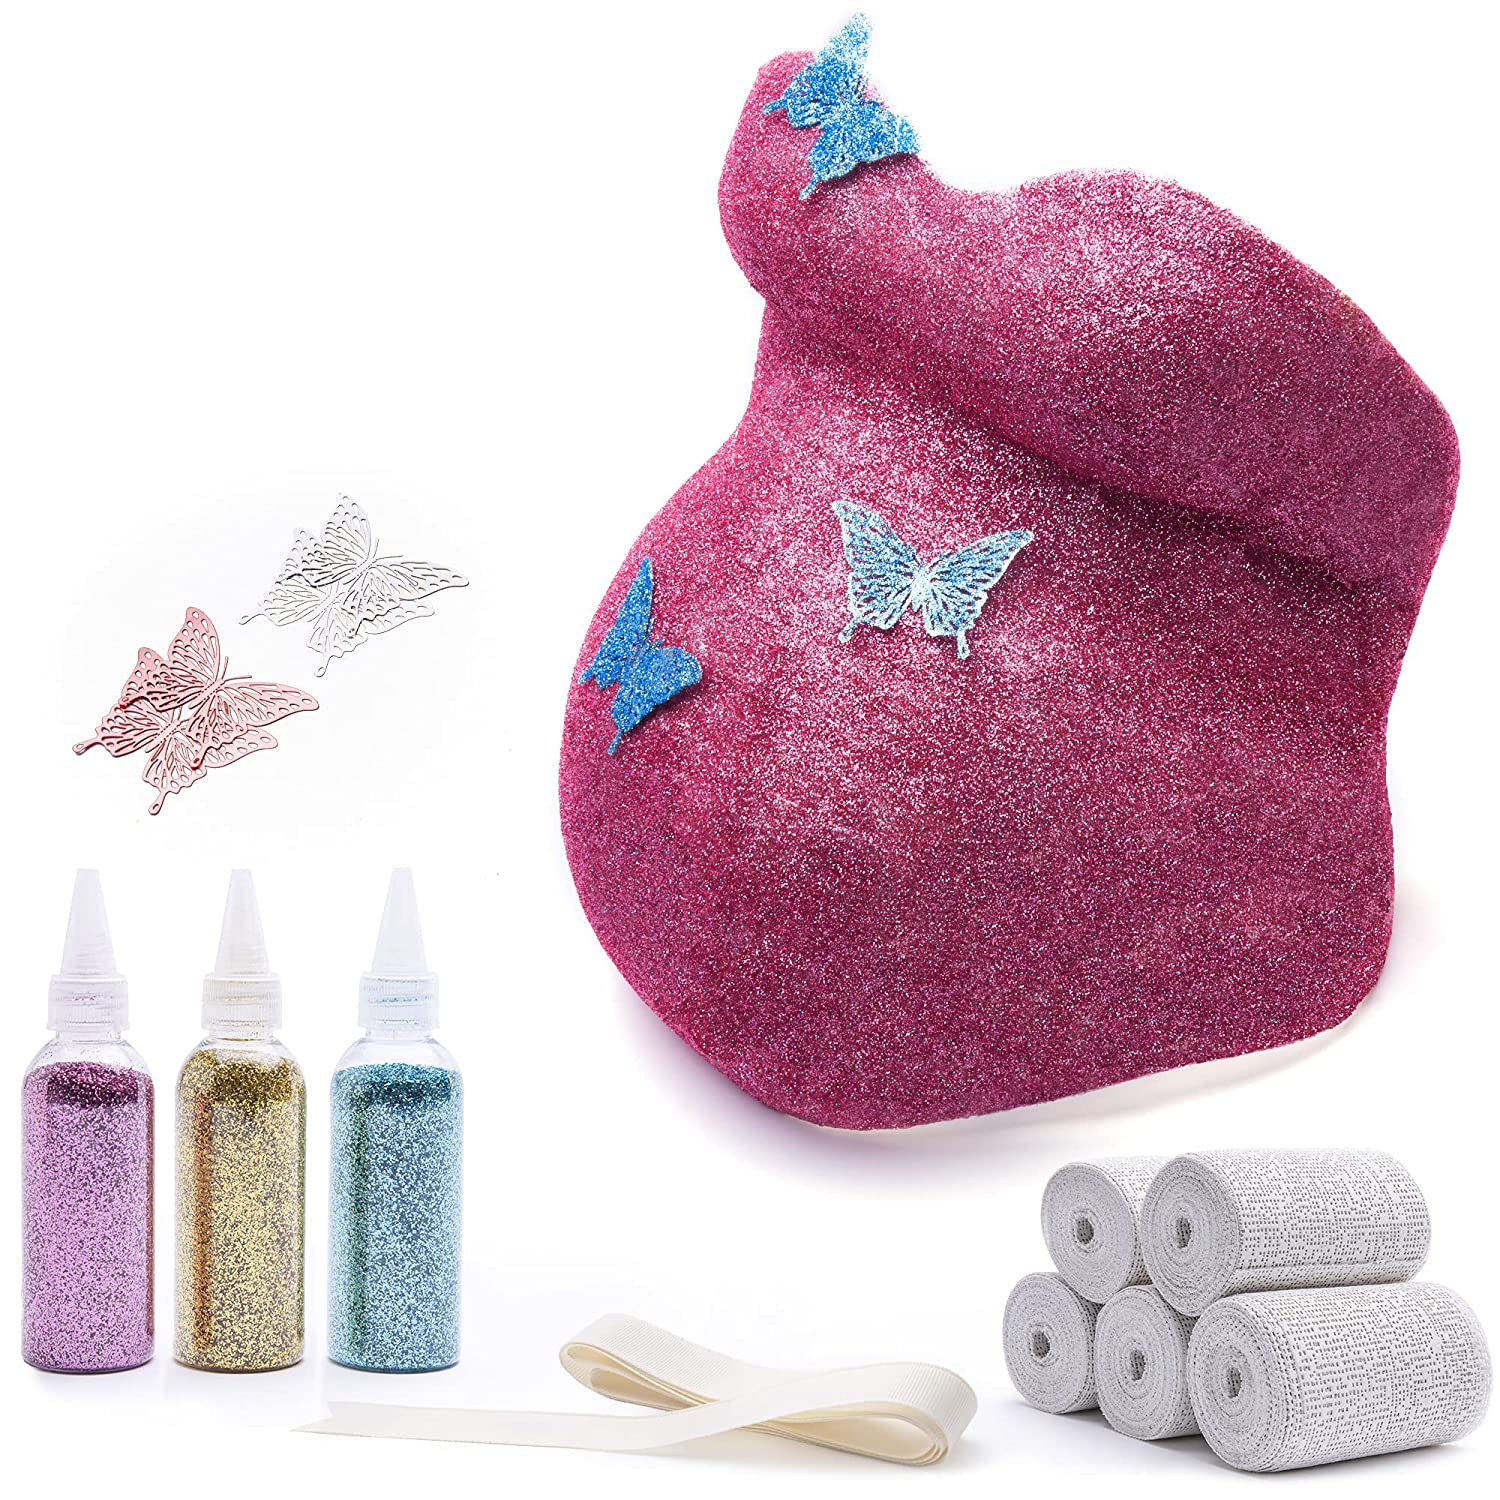 Proud Body Belly Cast Kit for Pregnant Moms – Baby Stuff Gifts